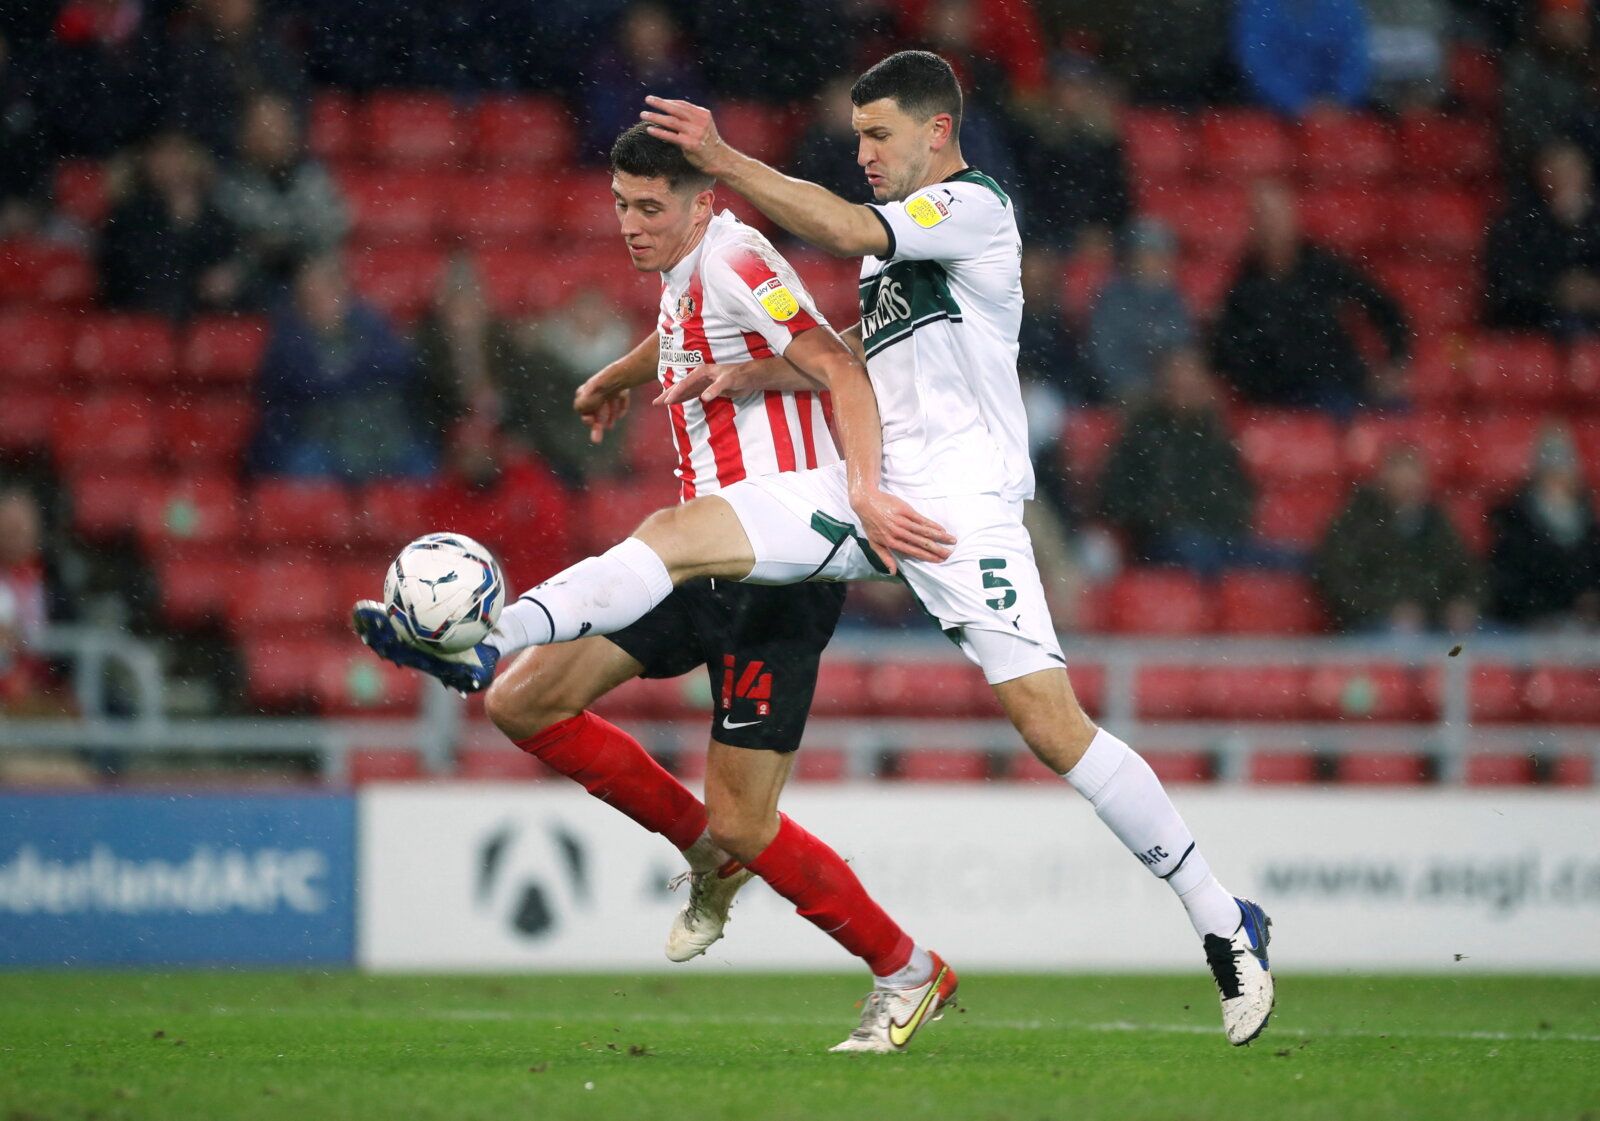 Soccer Football - League One- Sunderland v Plymouth Argyle - Stadium of Light, Sunderland, Britain - December 11, 2021  Sunderland?s Ross Stewart in action with Plymouth?s James Wilson  Action Images/Lee Smith  EDITORIAL USE ONLY. No use with unauthorized audio, video, data, fixture lists, club/league logos or 